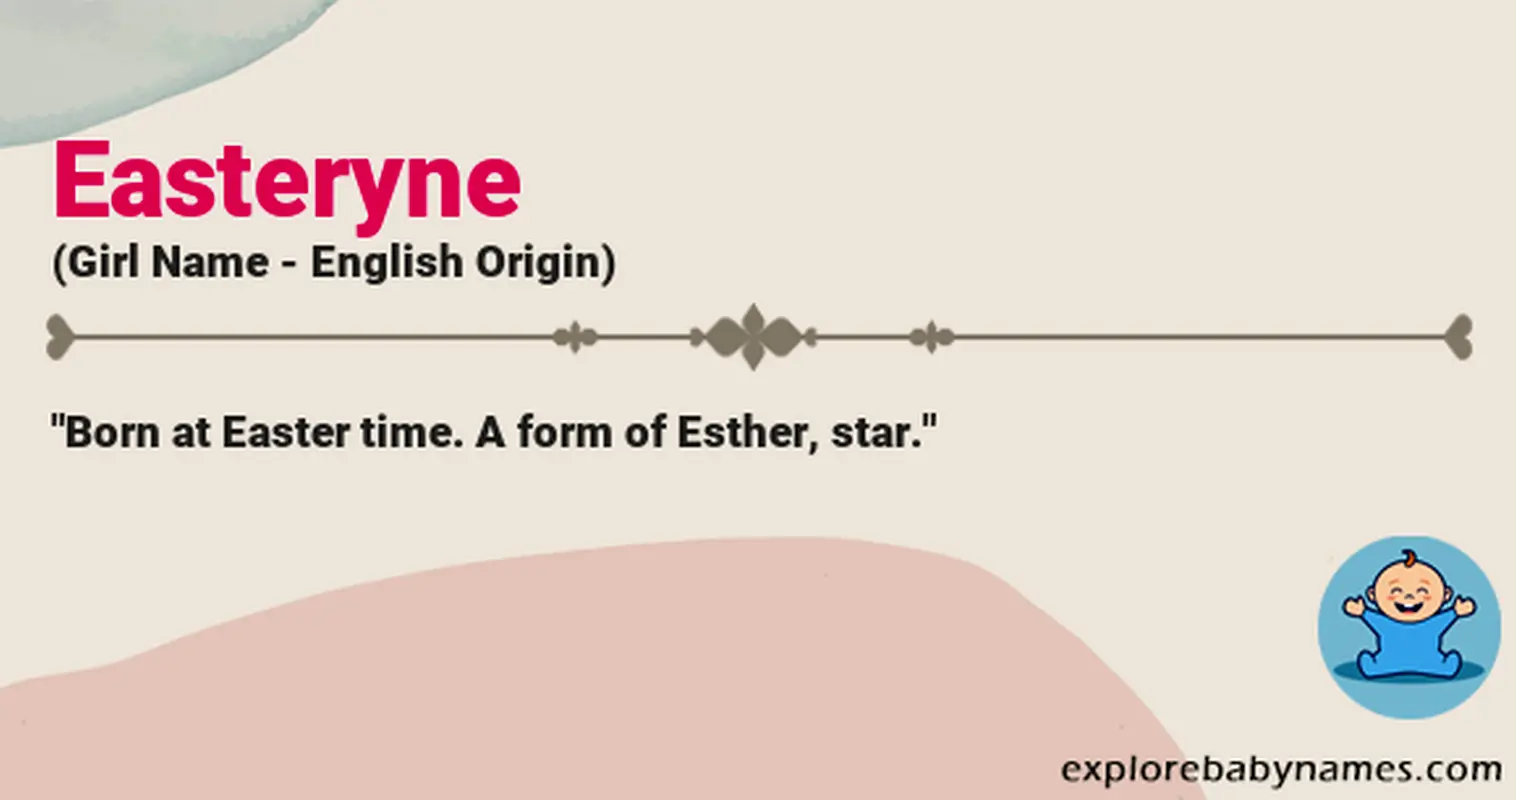 Meaning of Easteryne